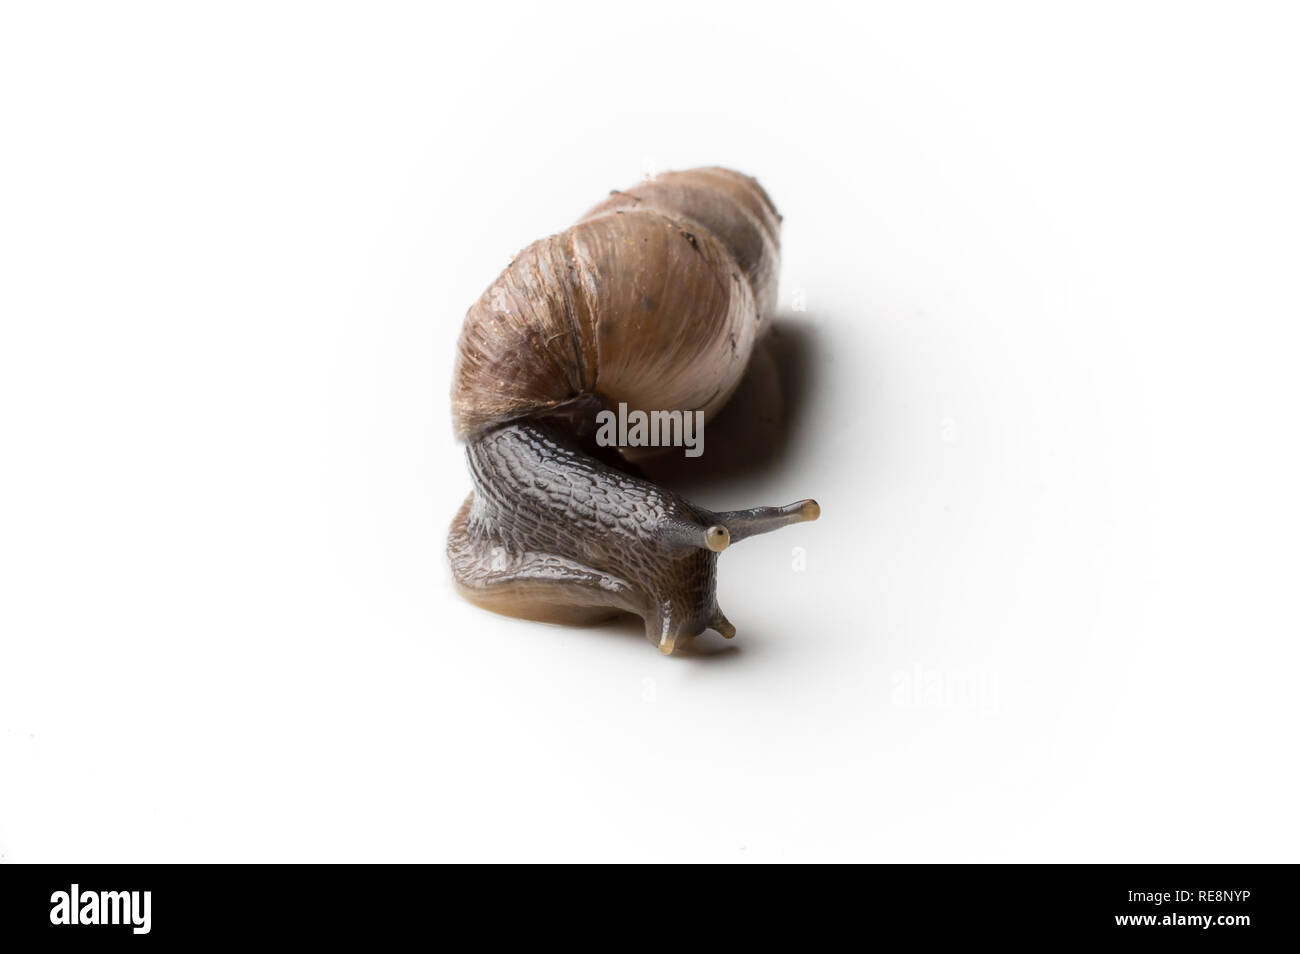 Isolated Close-up of Decollate Snail Stock Photo